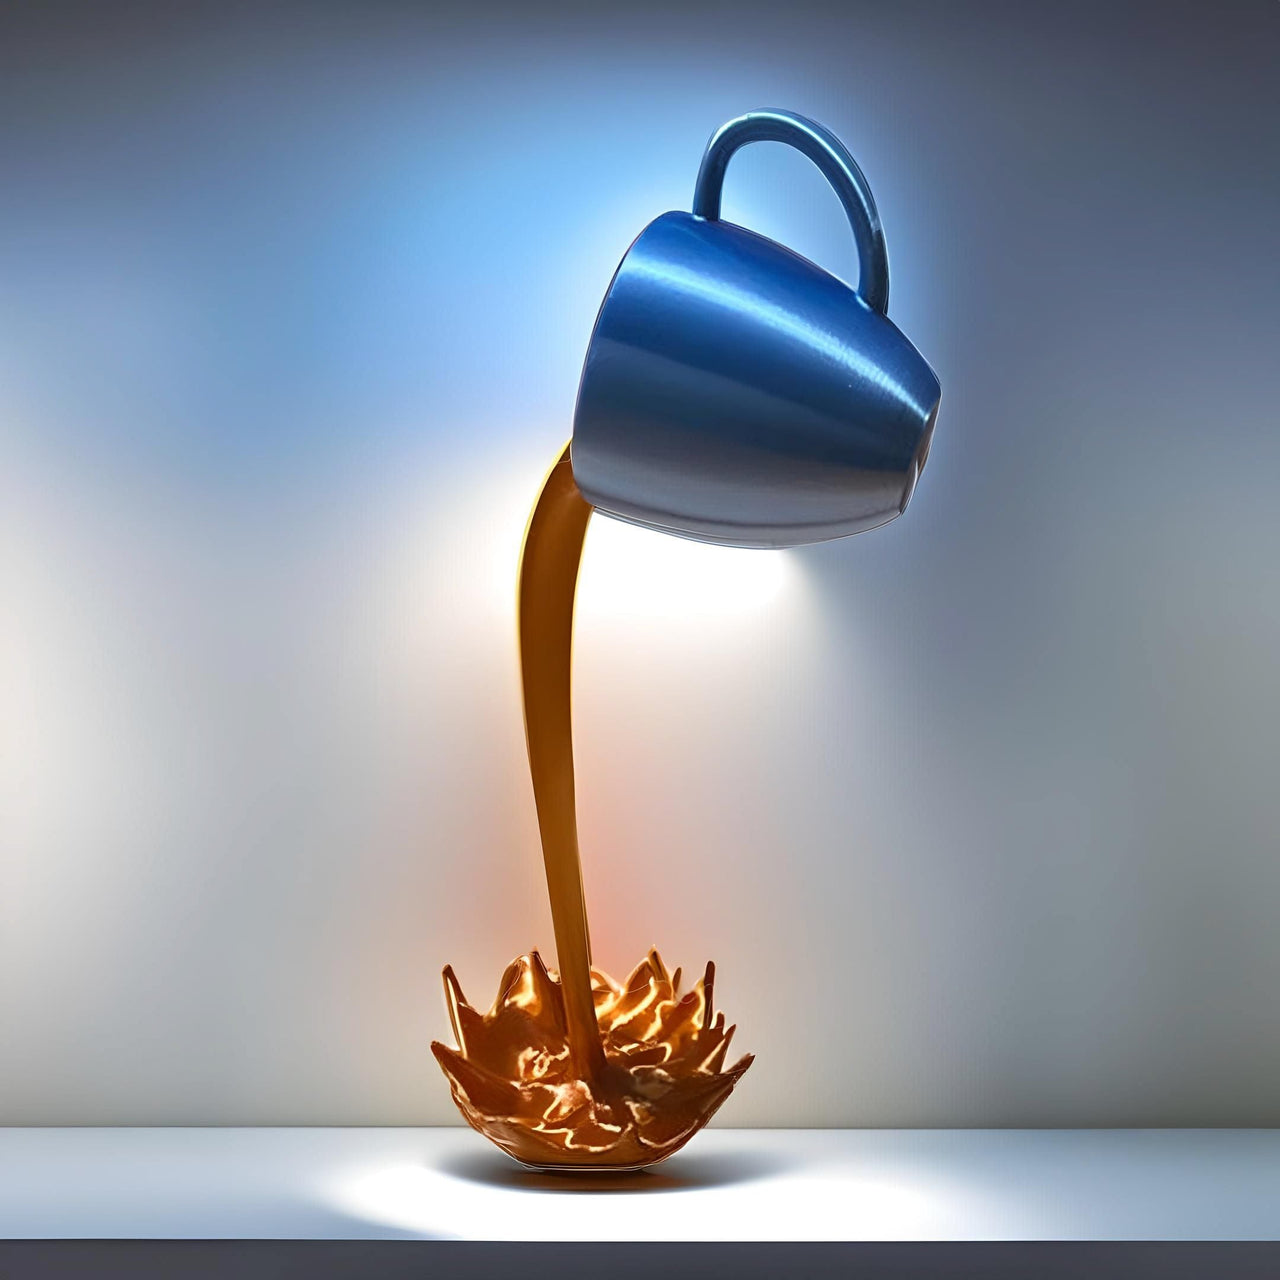 The Dripping Coffee Sculpture